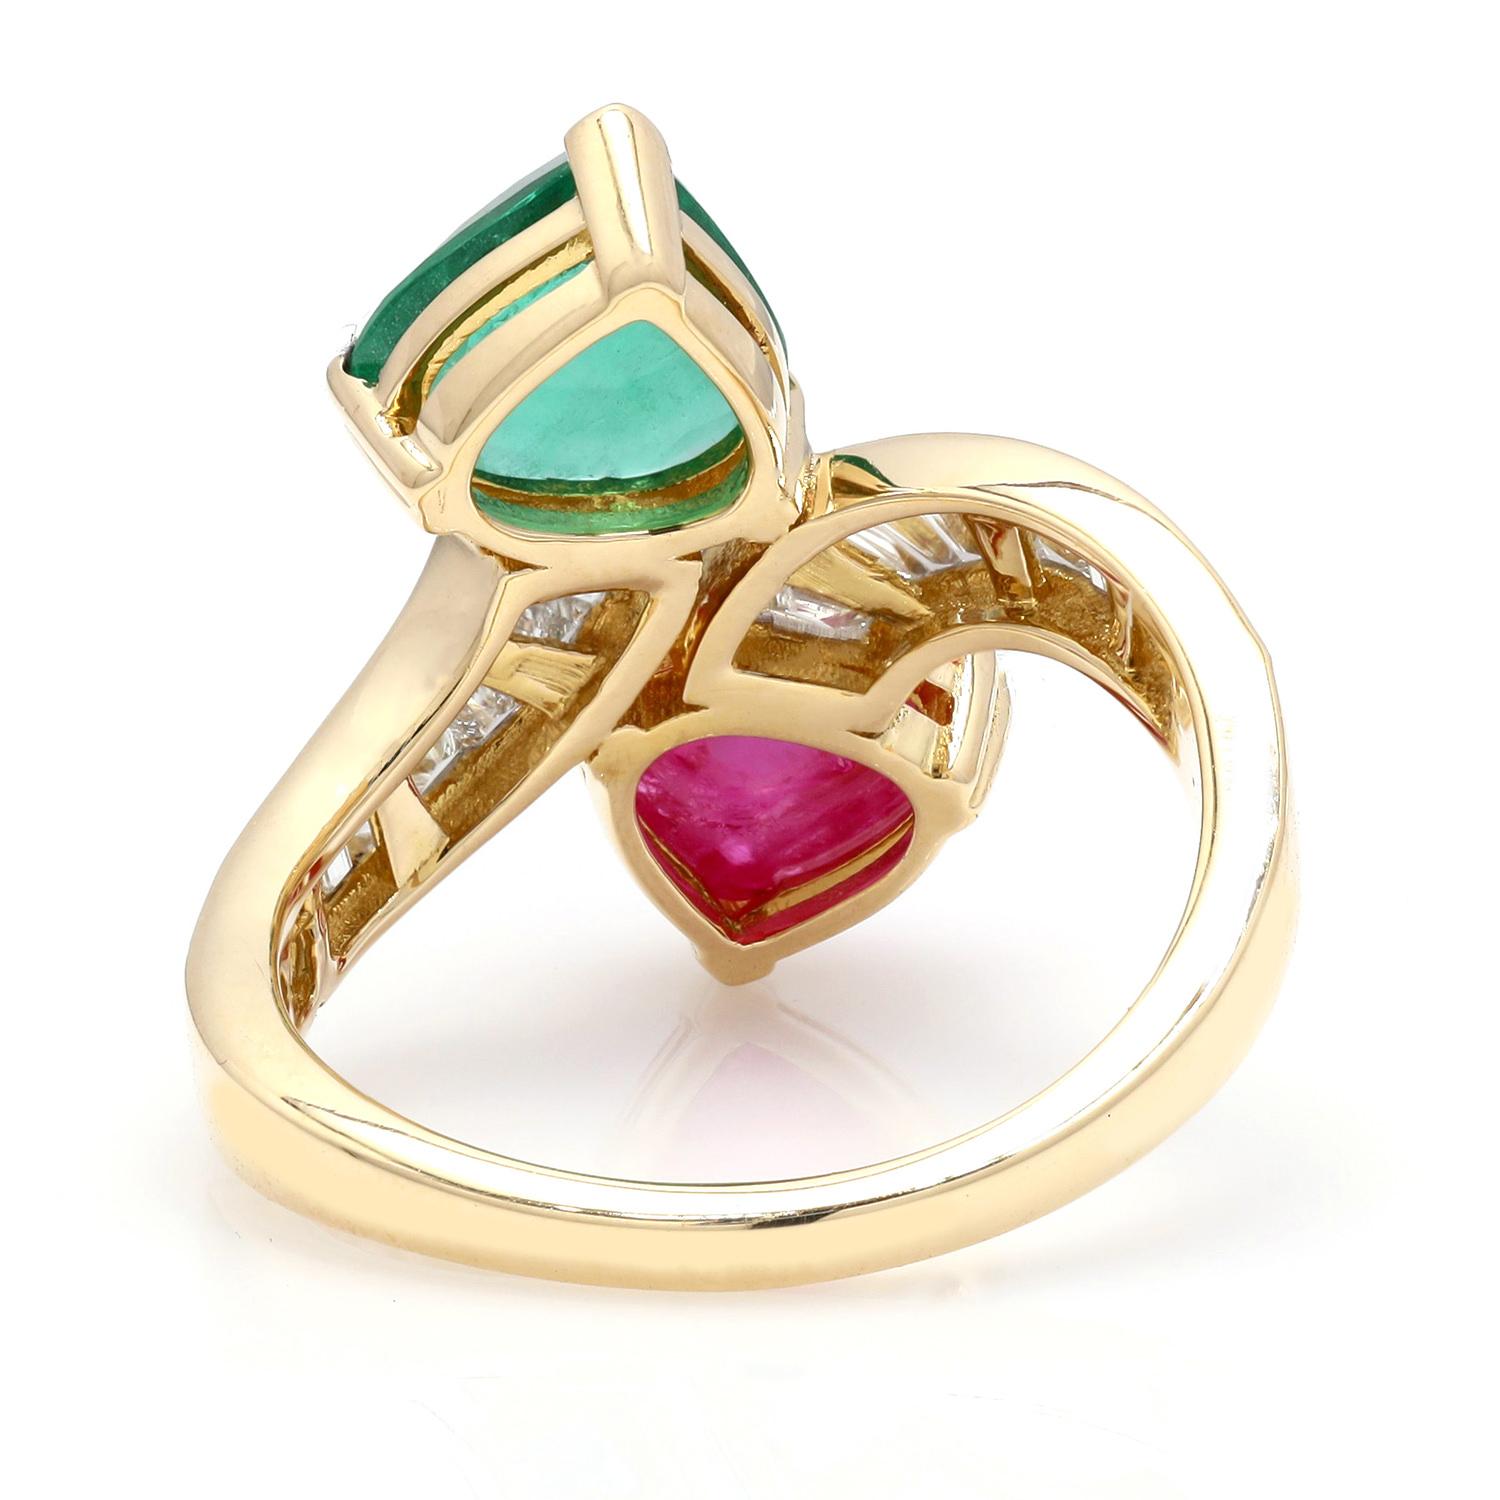 Natural Ruby Emerald and Diamond Bypass Ring 4.53 Carats Total 18K Yellow Gold In Excellent Condition For Sale In Laguna Niguel, CA